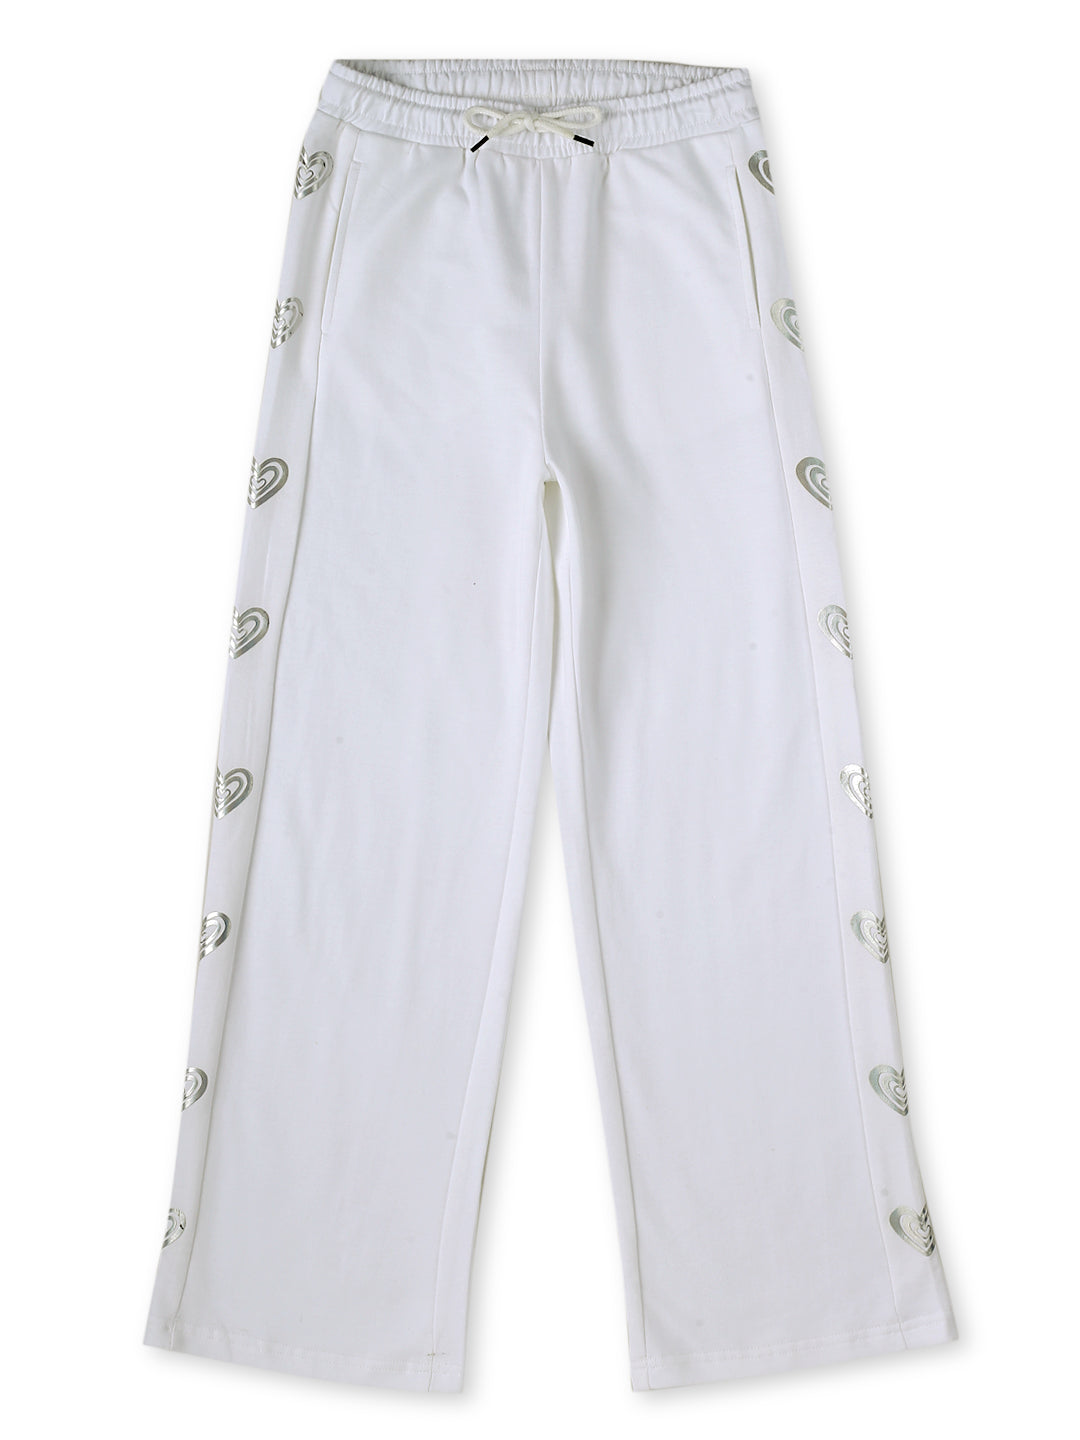 Girls White Cotton Solid Track Pant